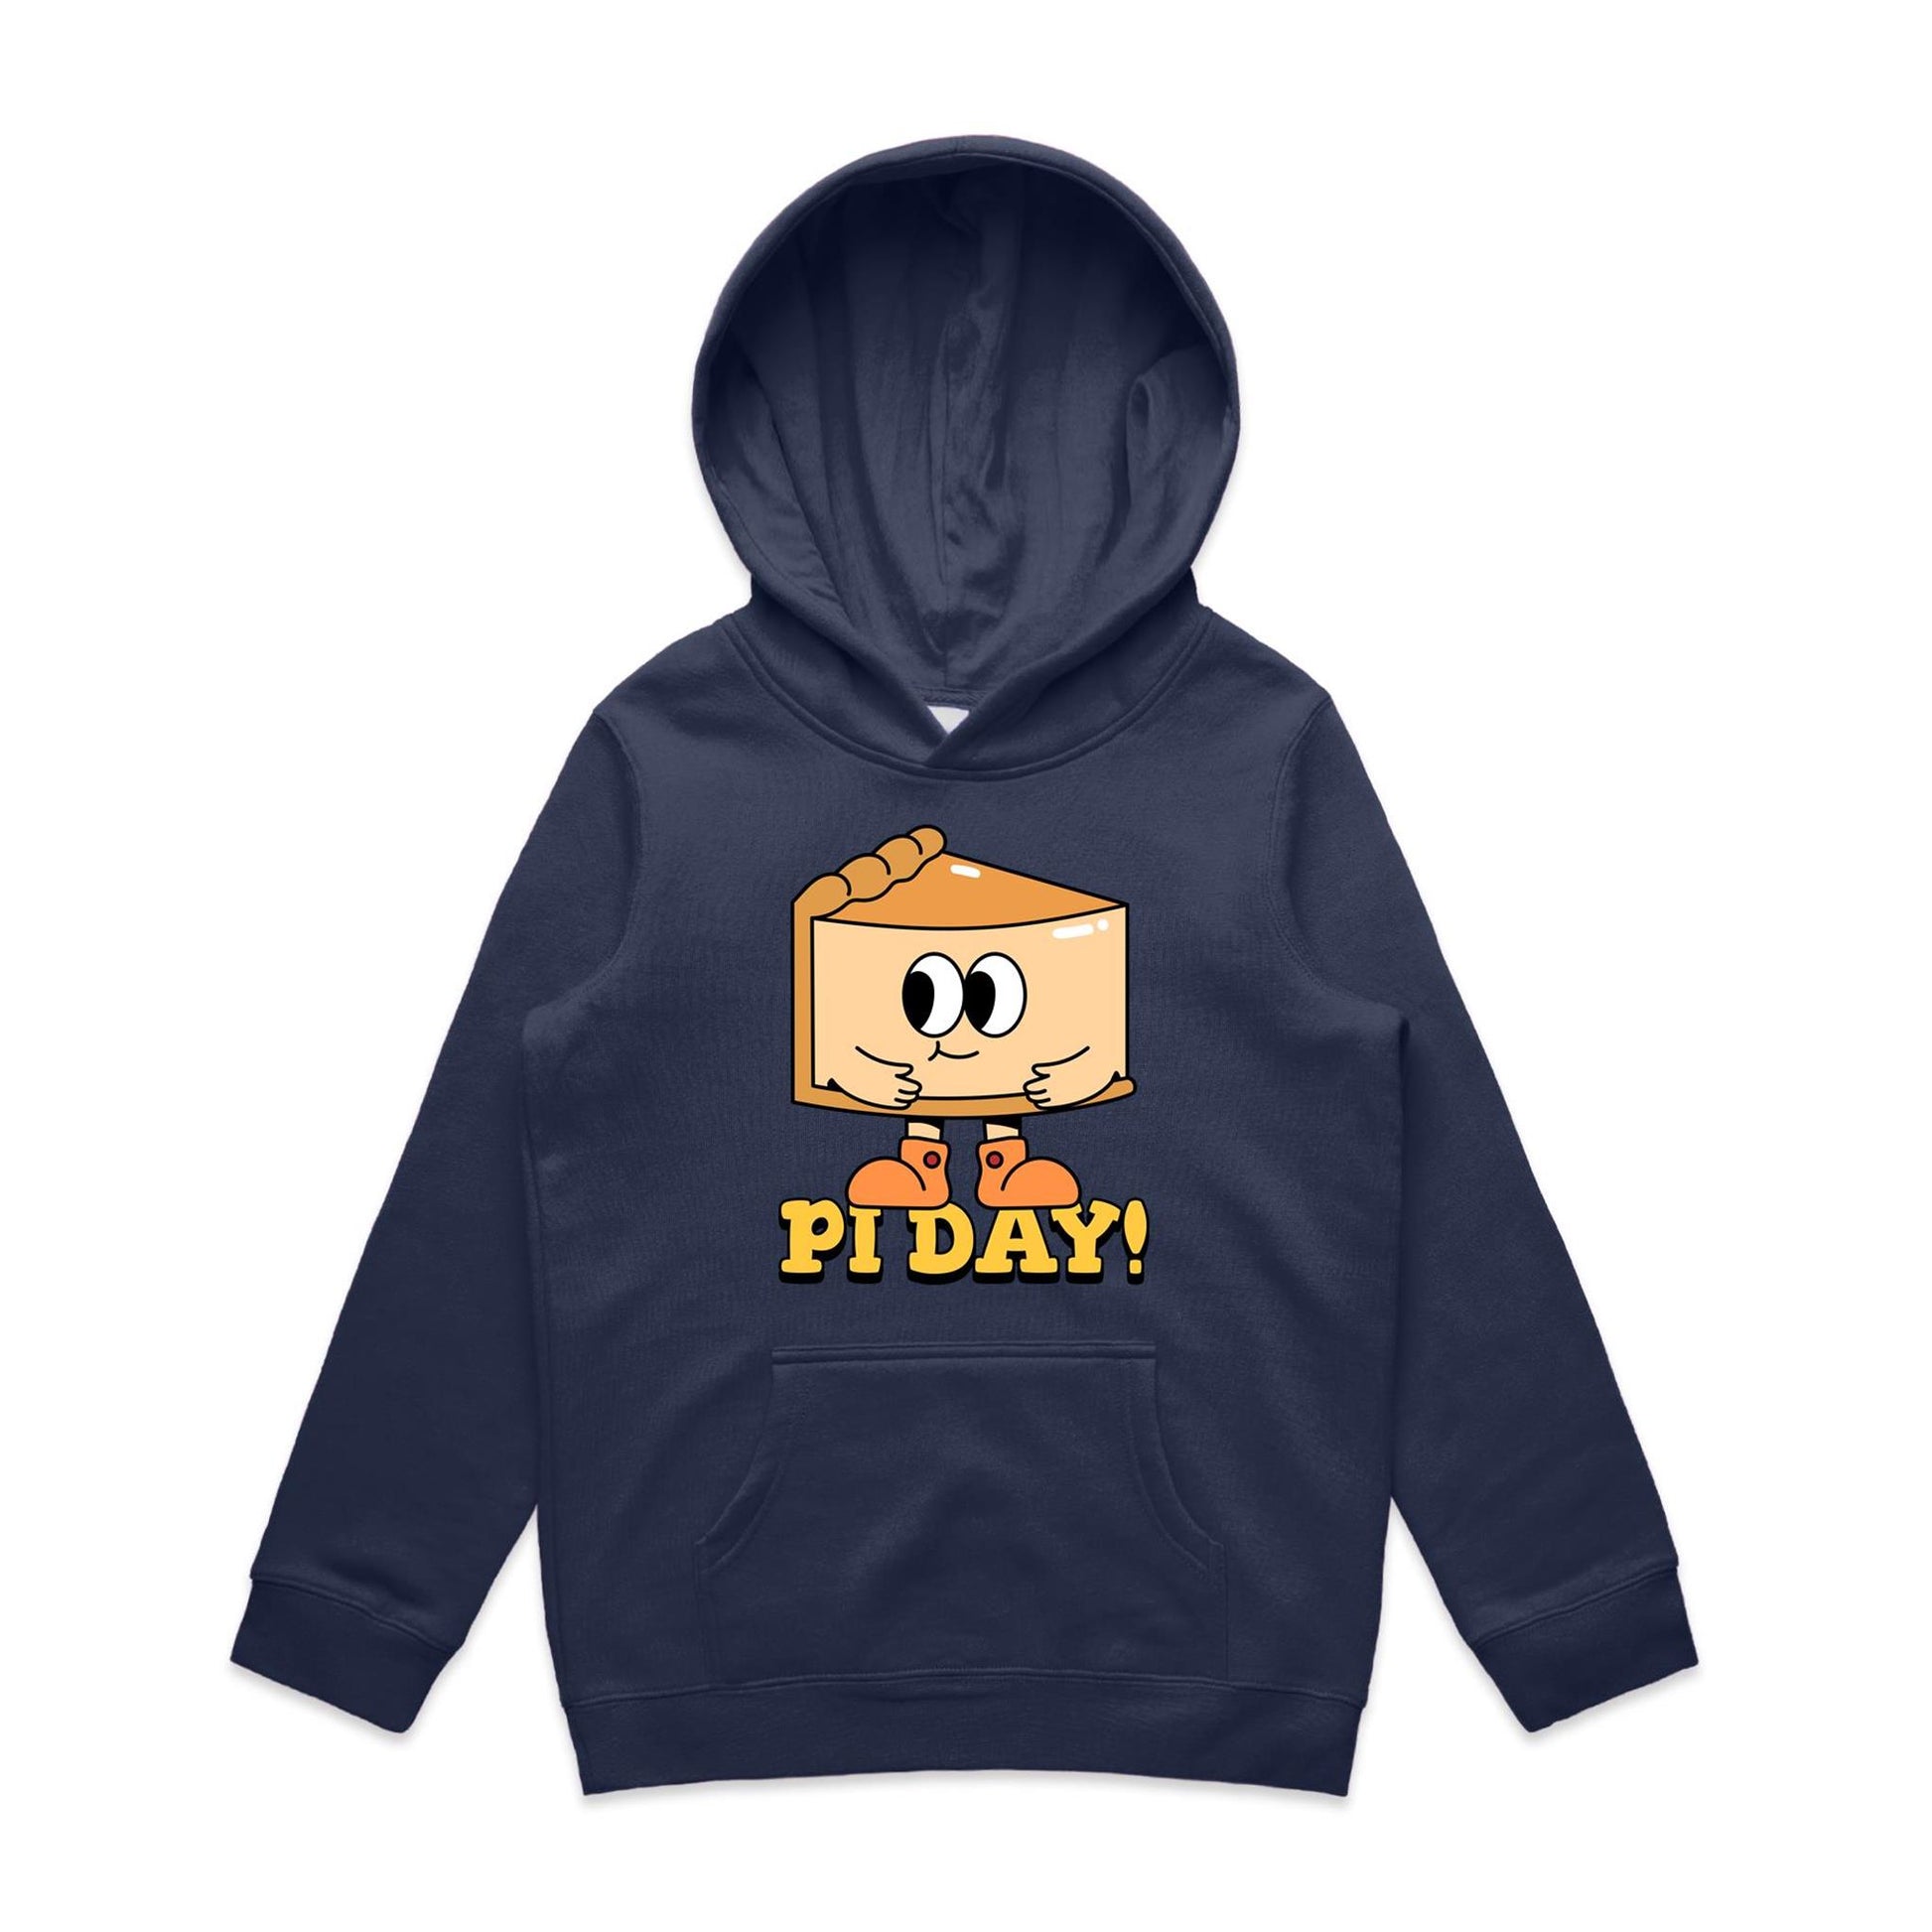 Pi Day - Youth Supply Hood Midnight Blue Kids Hoodie